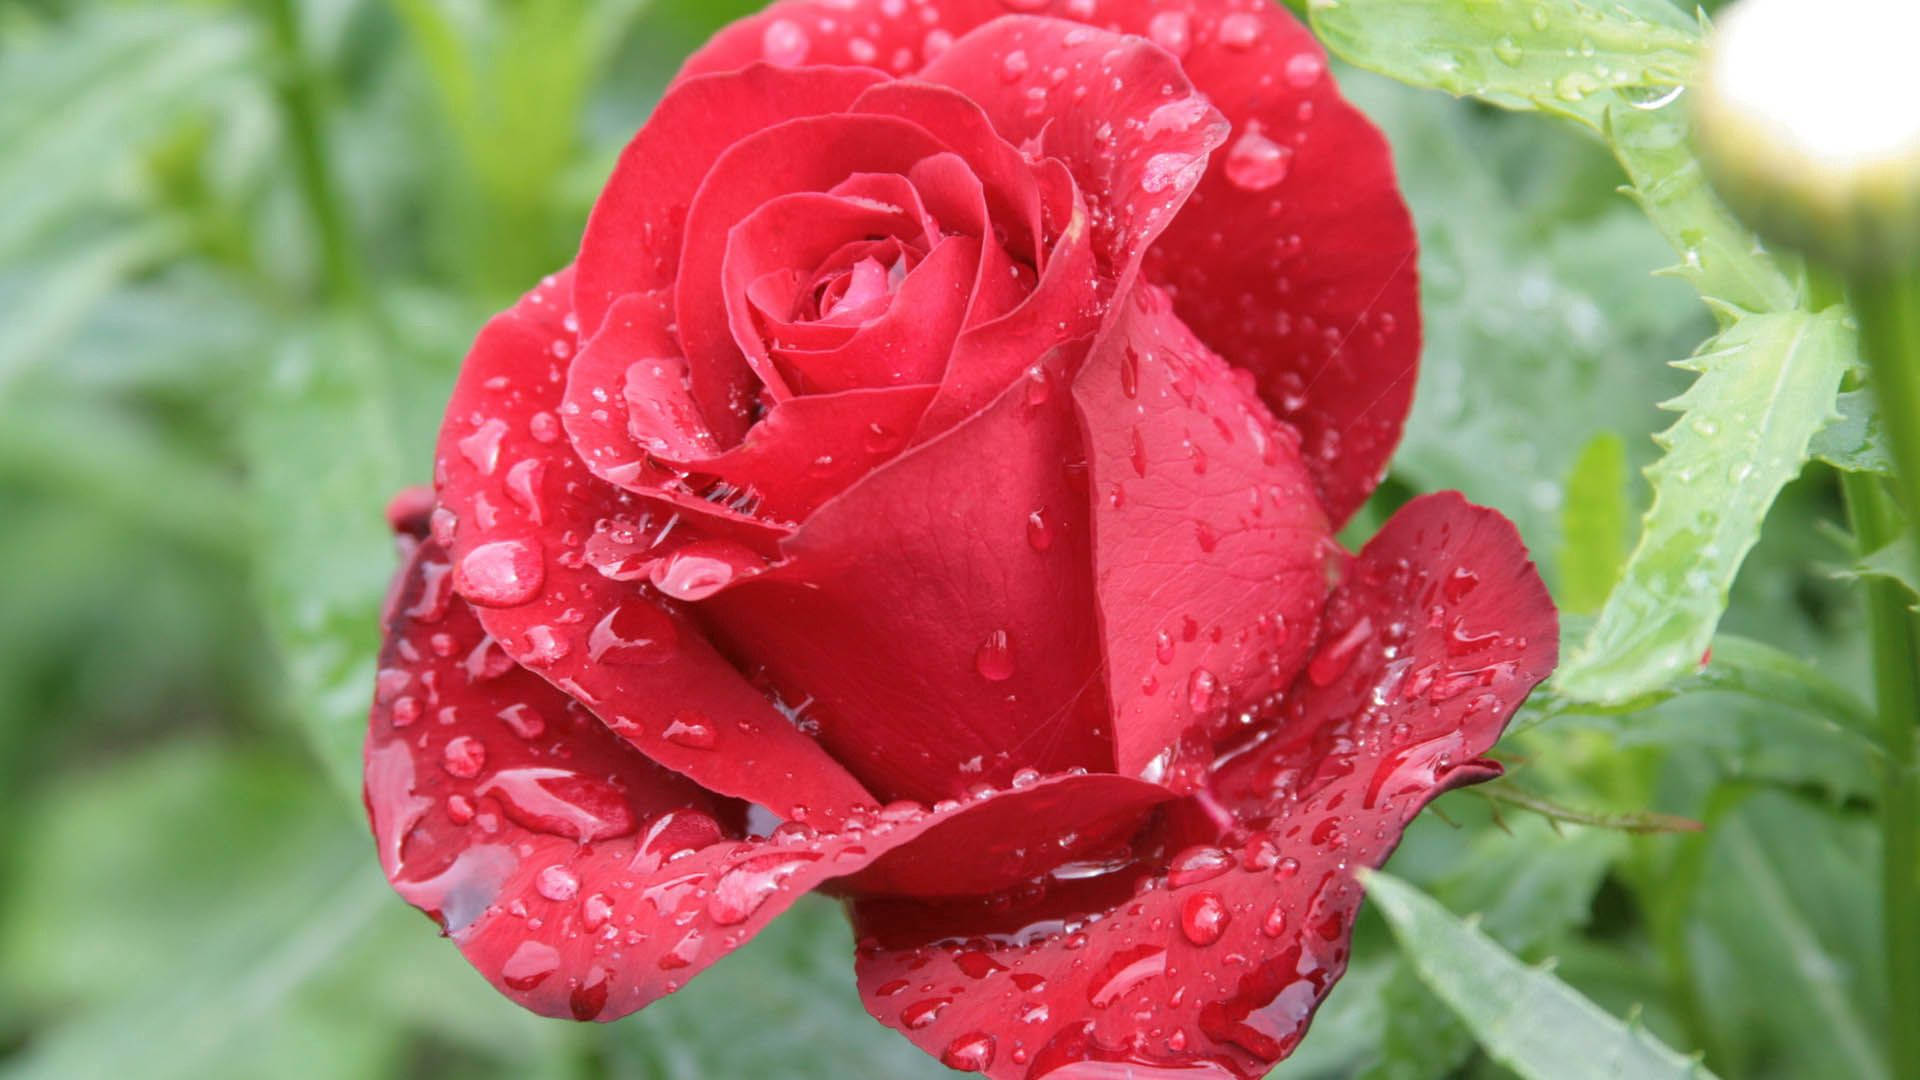 A Red Rose With Water Droplets On It Background